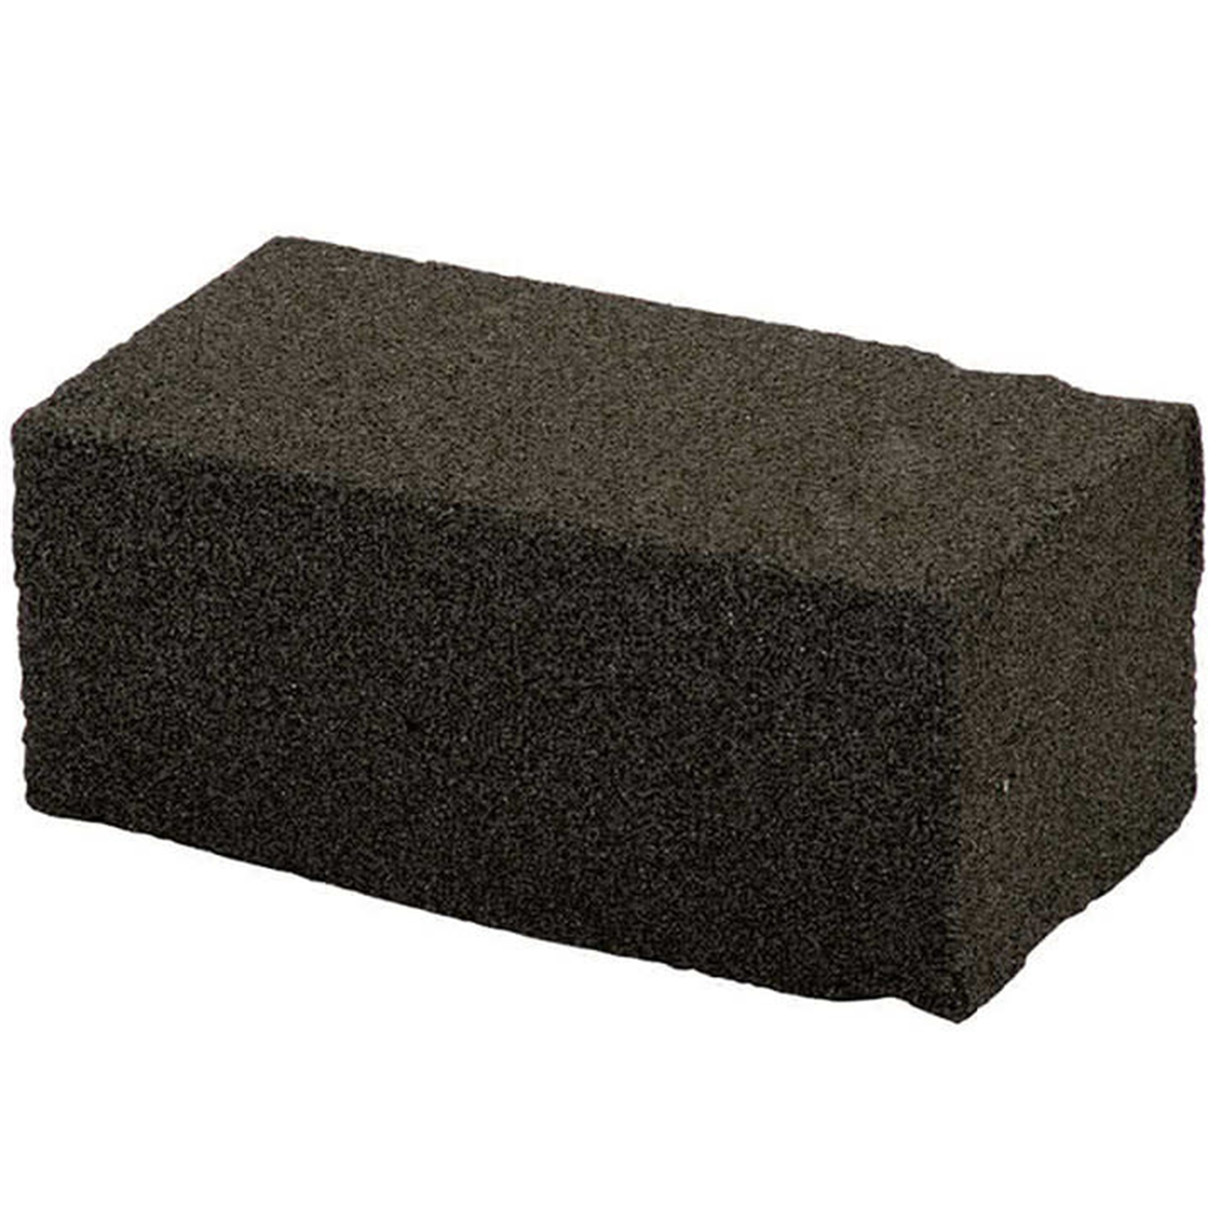  Outdoor Barbecue Cleaning Brick Block Stone Grill Pumice